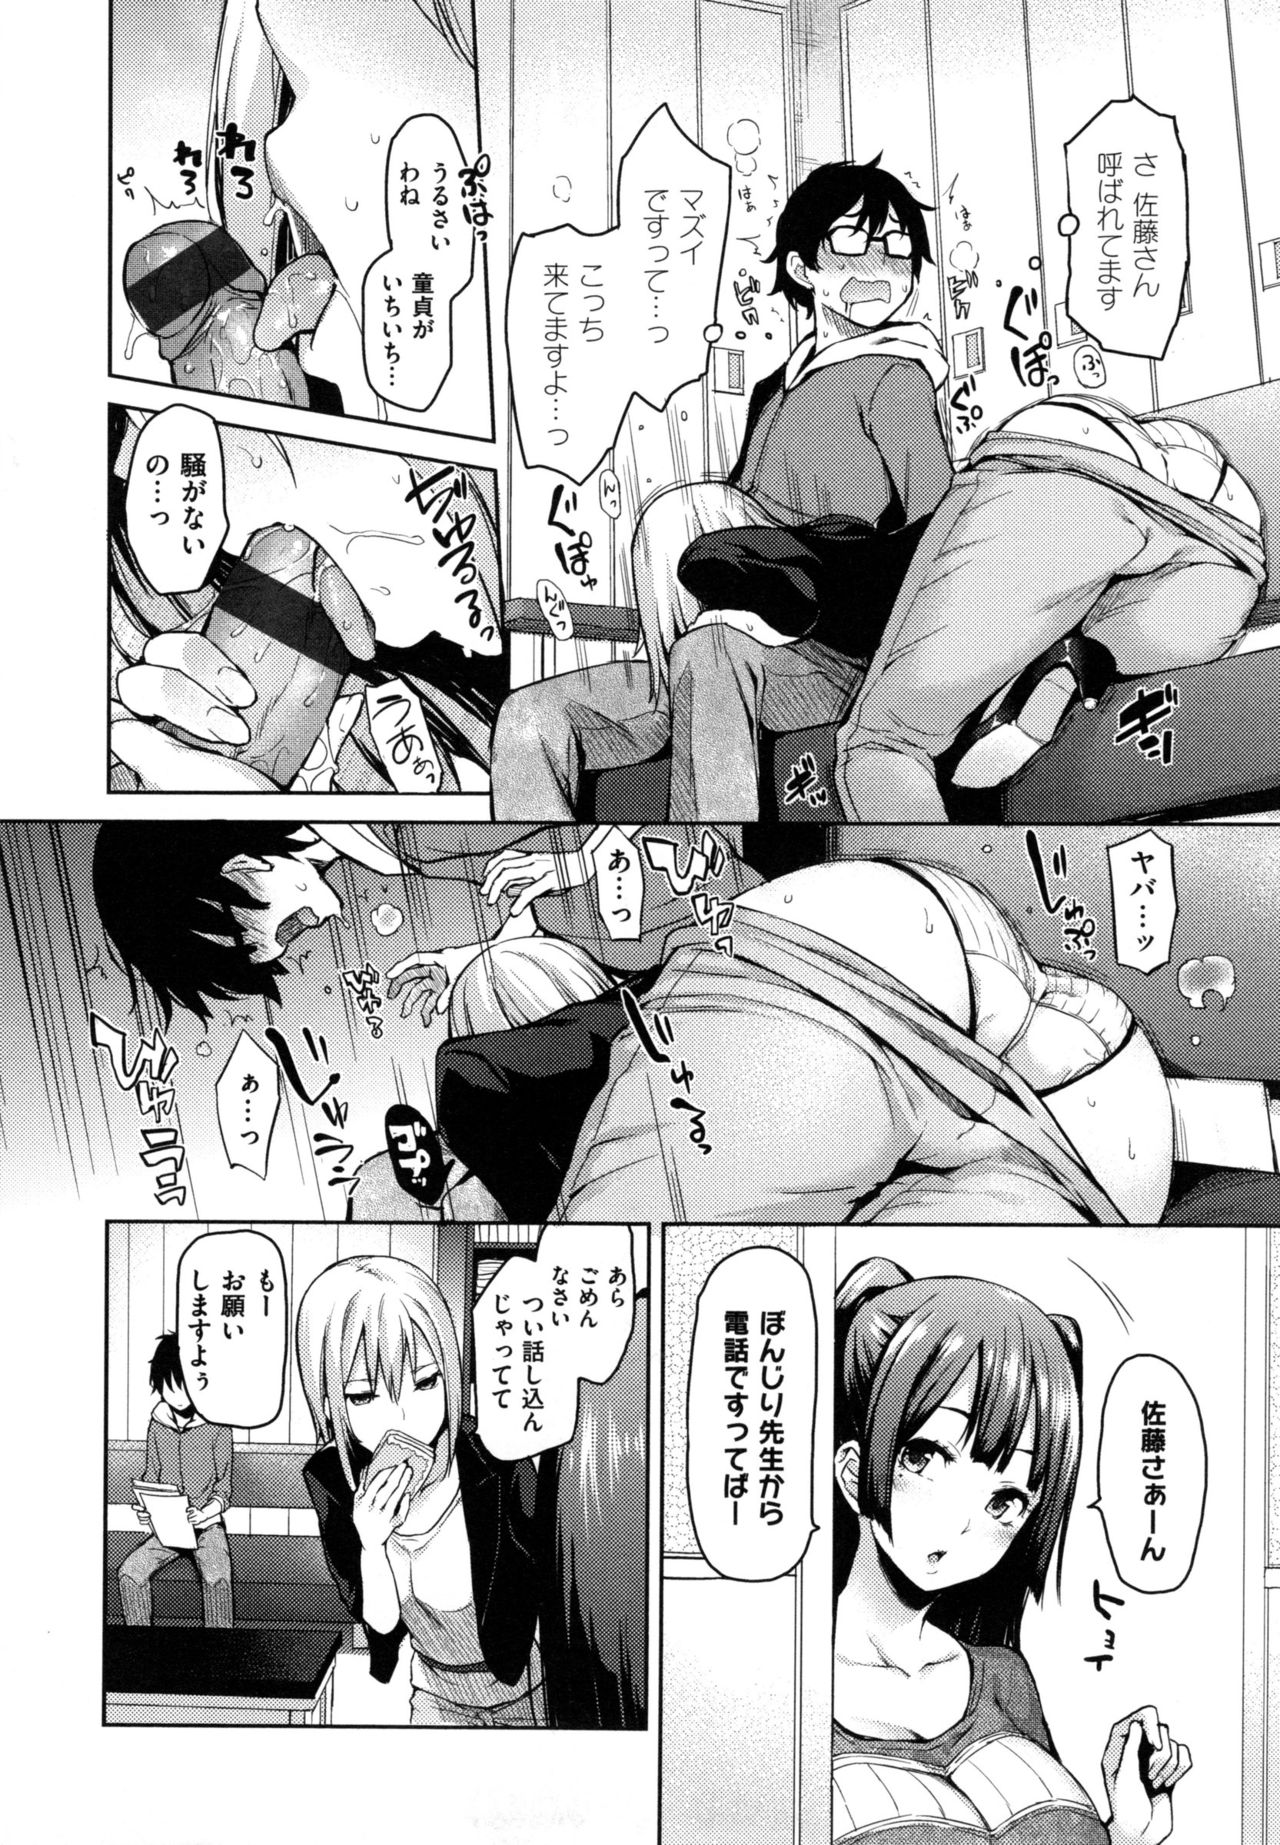 [Michiking] Shujuu Ecstasy - Sexual Relation of Master and Servant.  - page 39 full